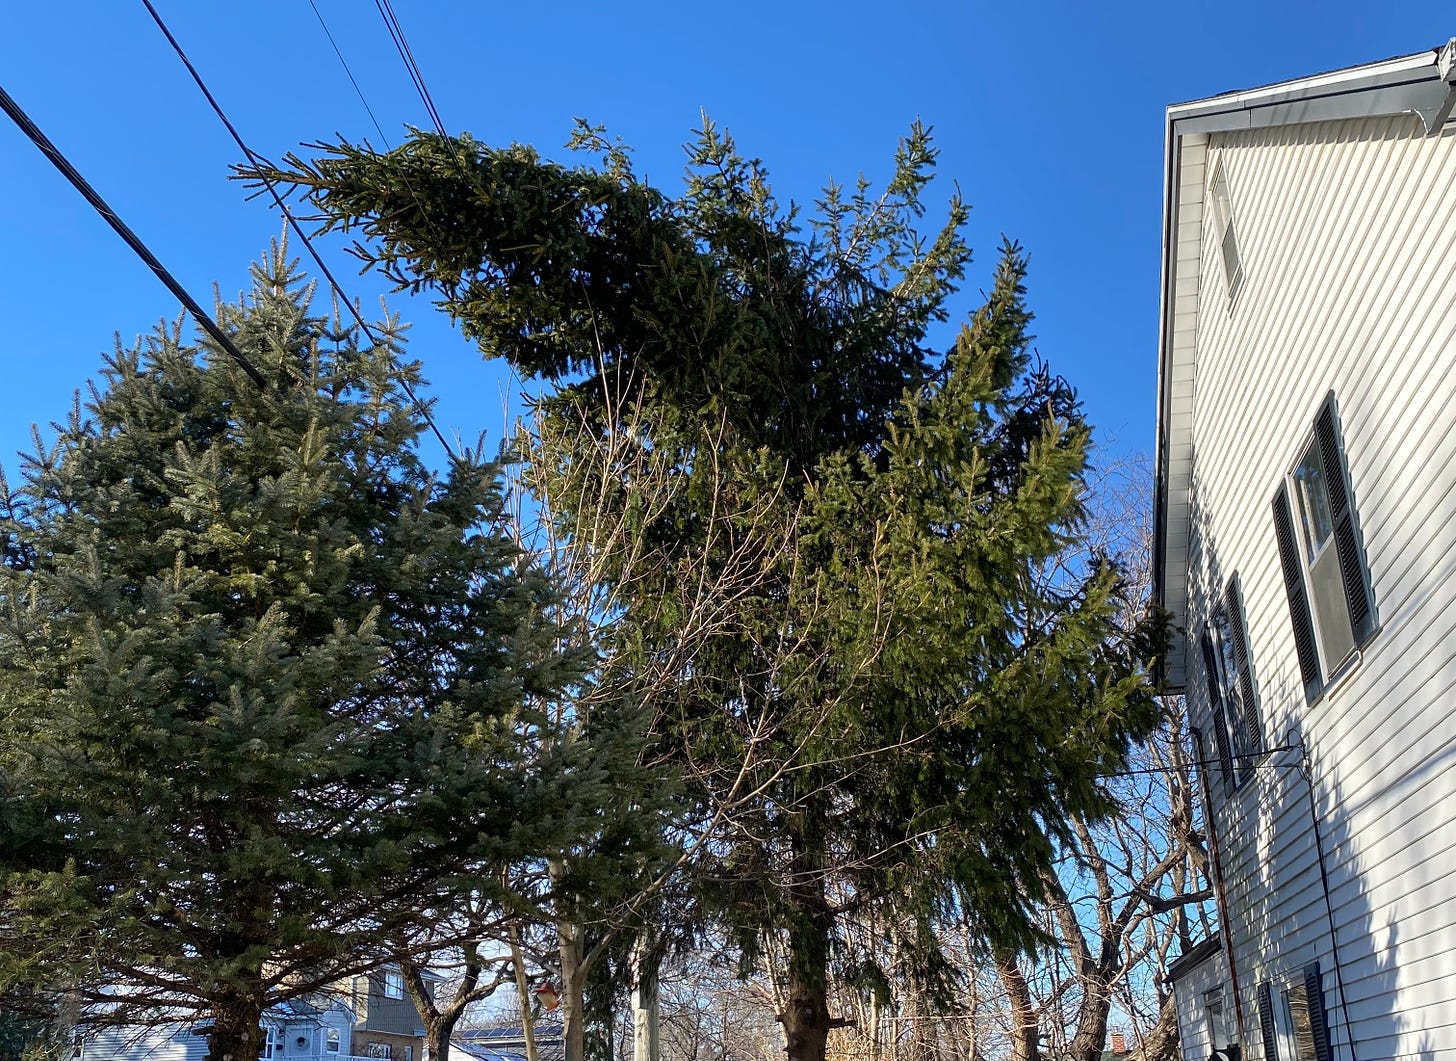 A pine tree stands next to a white house with black shutters, against a deep blue sky. The top of the pine is leaning way over to the left, resting against some power lines. It looks broken. 